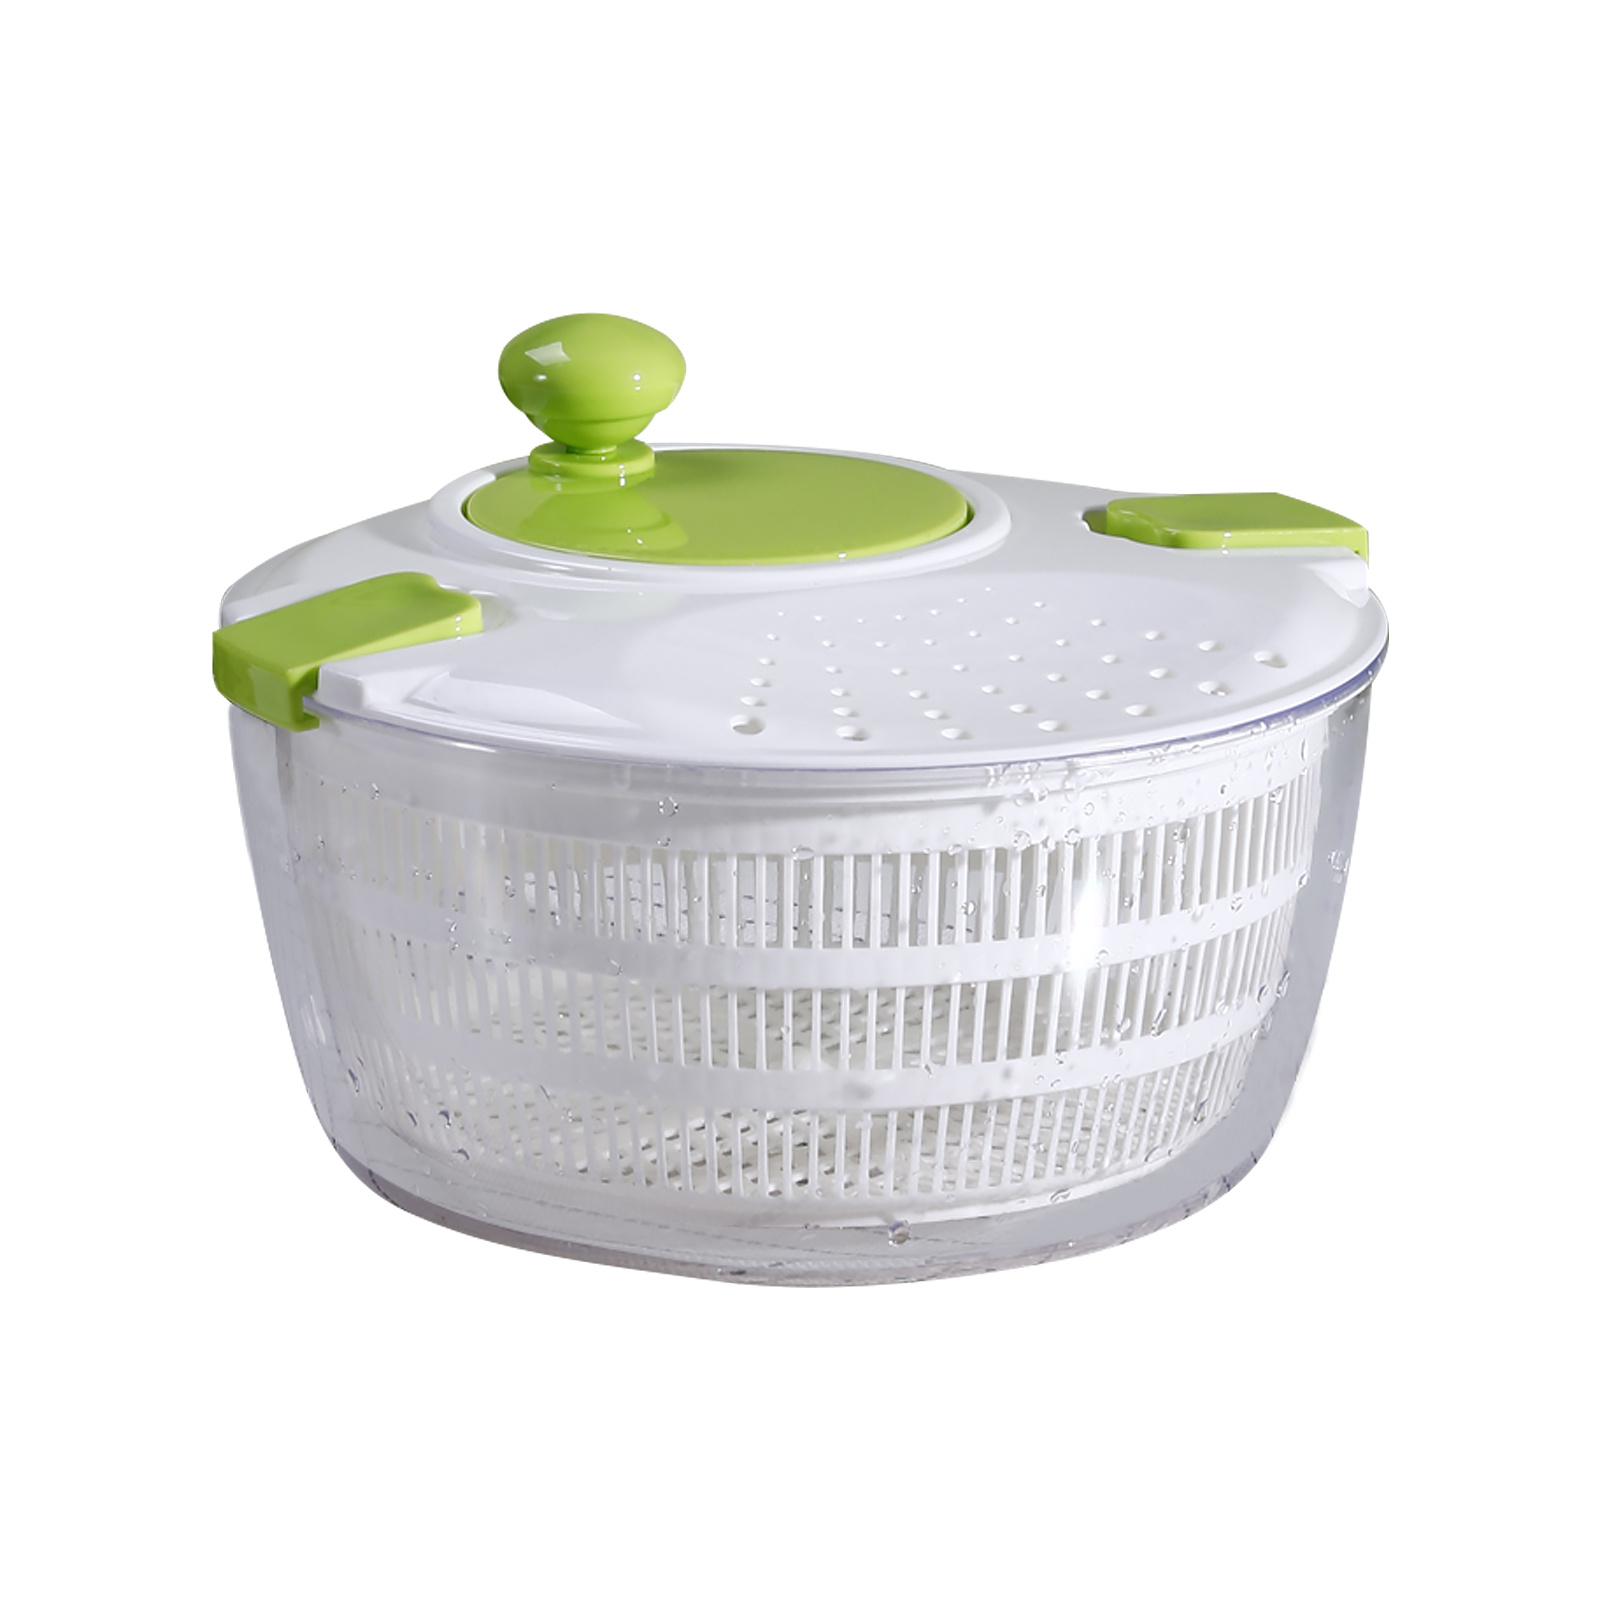 Salad Spinner-2.6 Qt, Small Manual Lettuce Spinner with Built-in